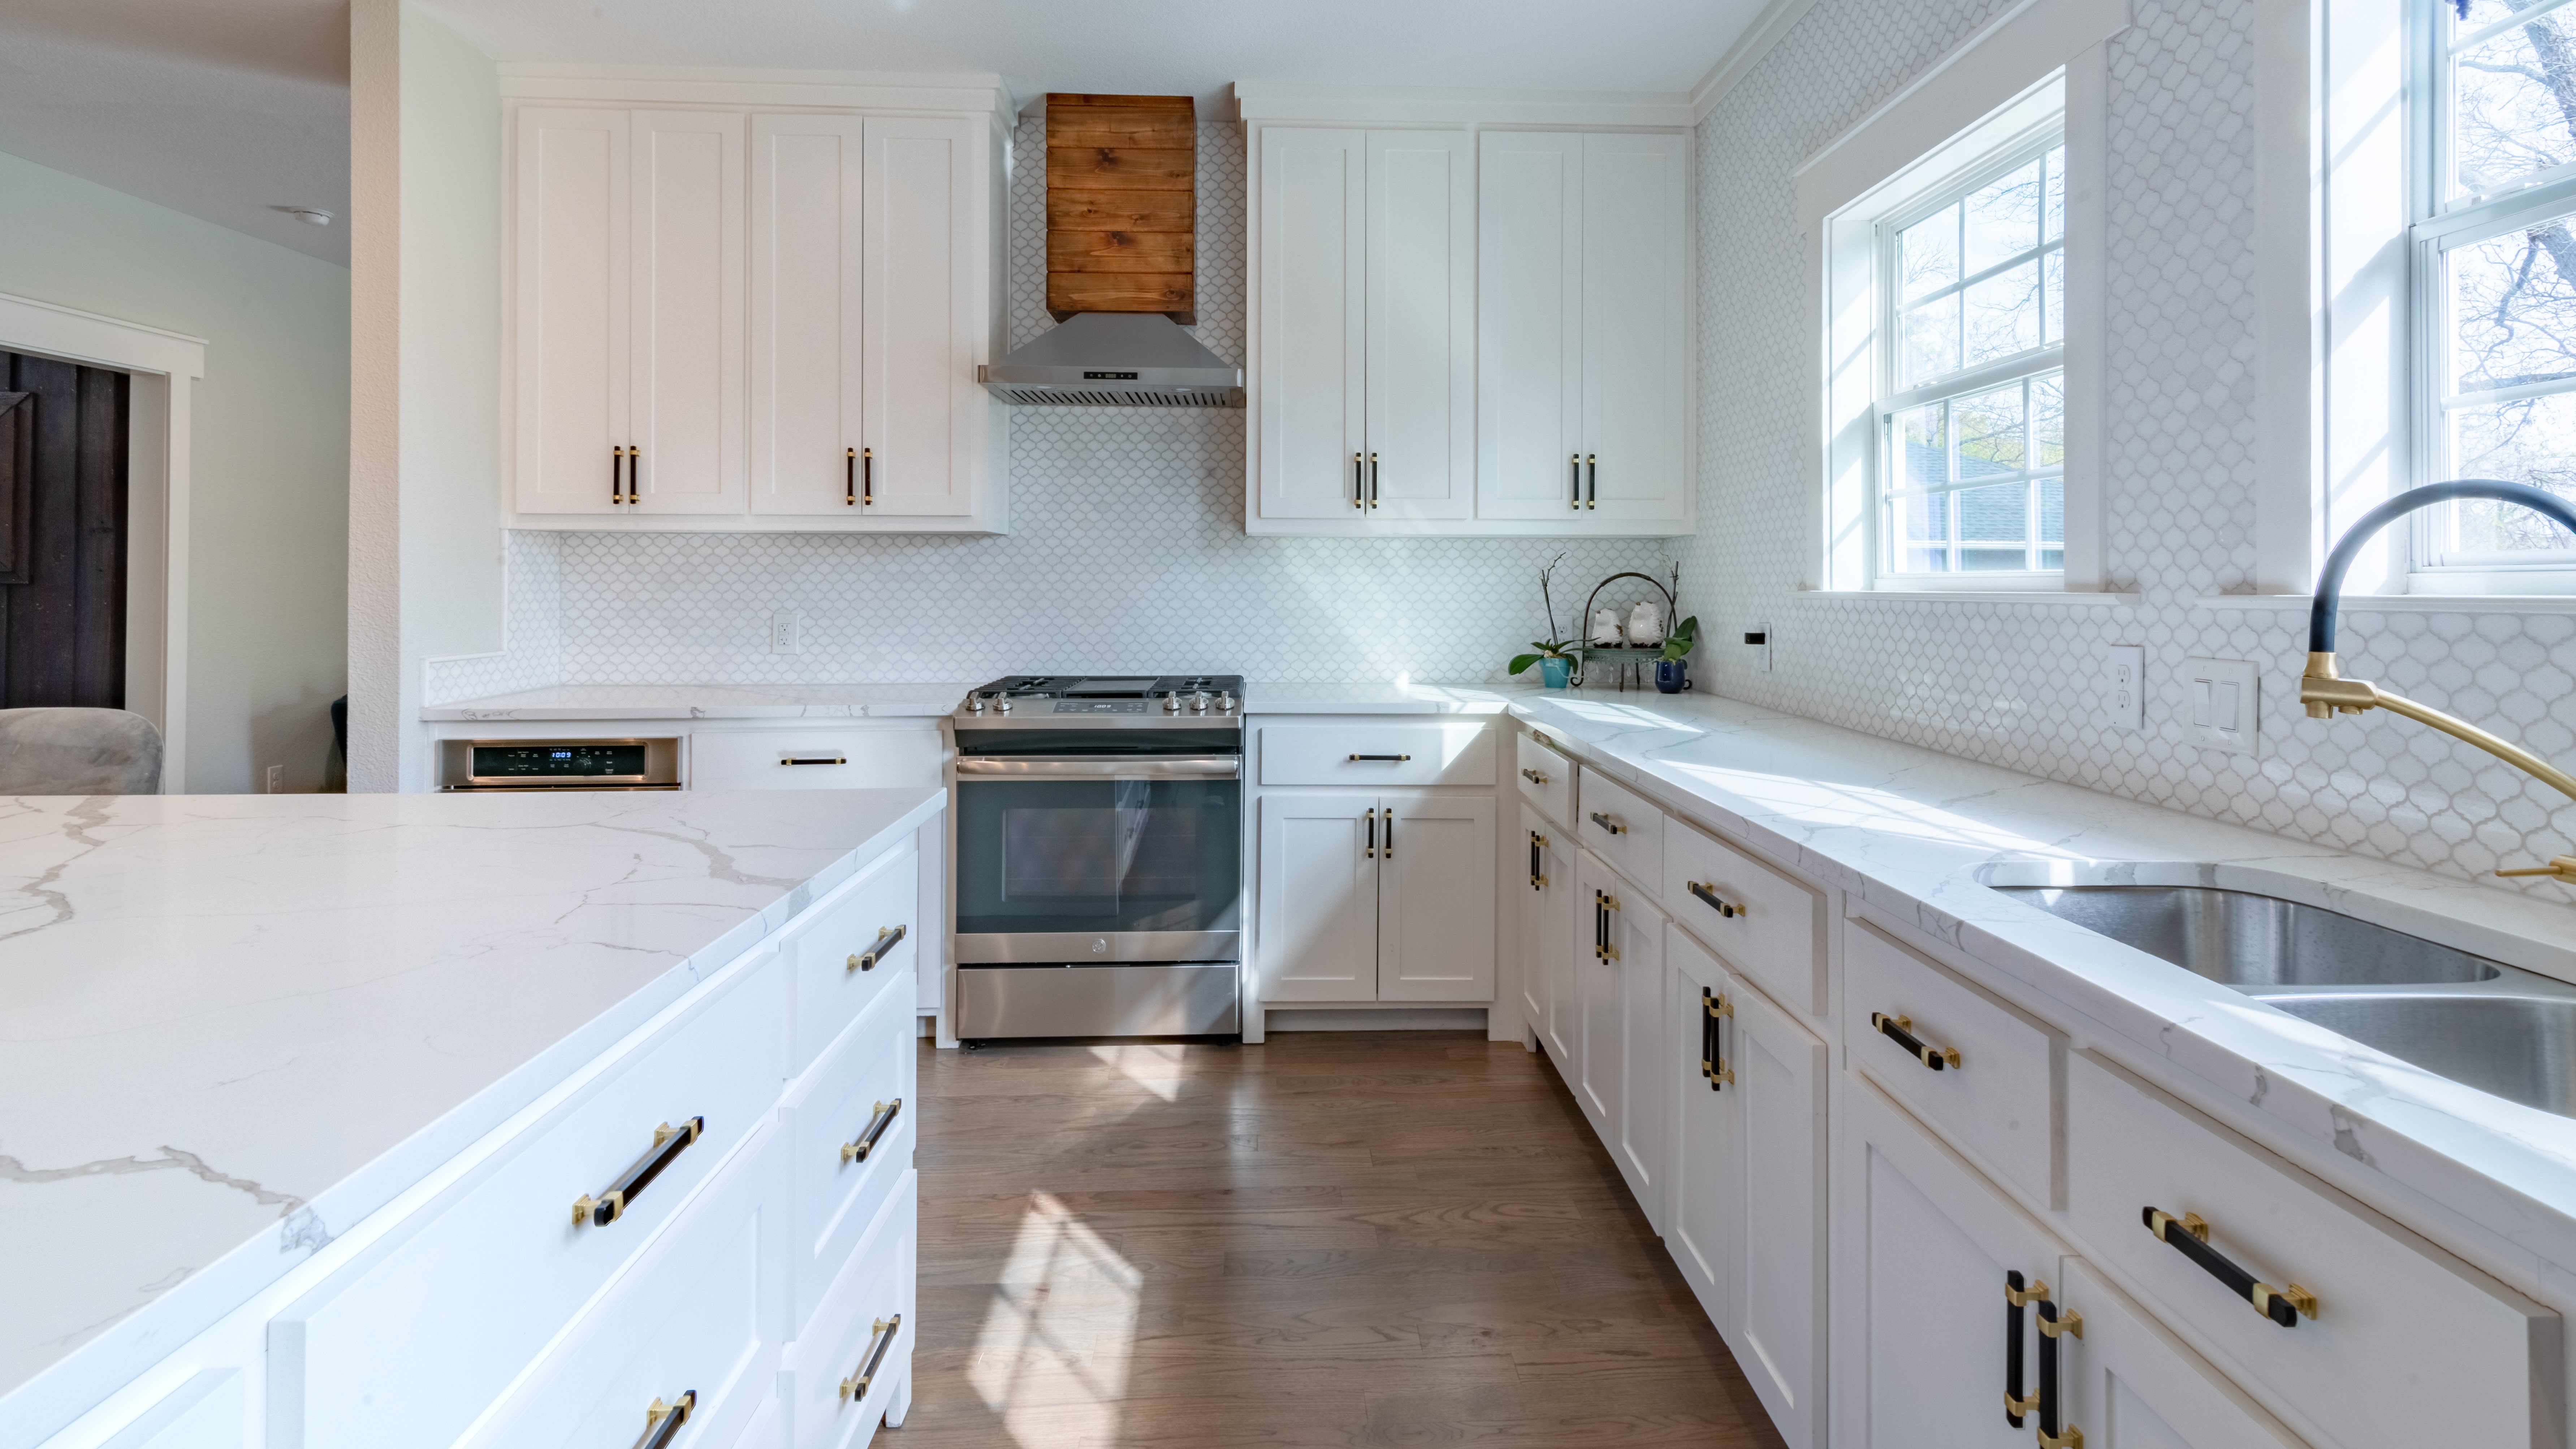 Modern Washington County kitchen with newly painting white cabinets and wood flooring by Colorwheel Painting